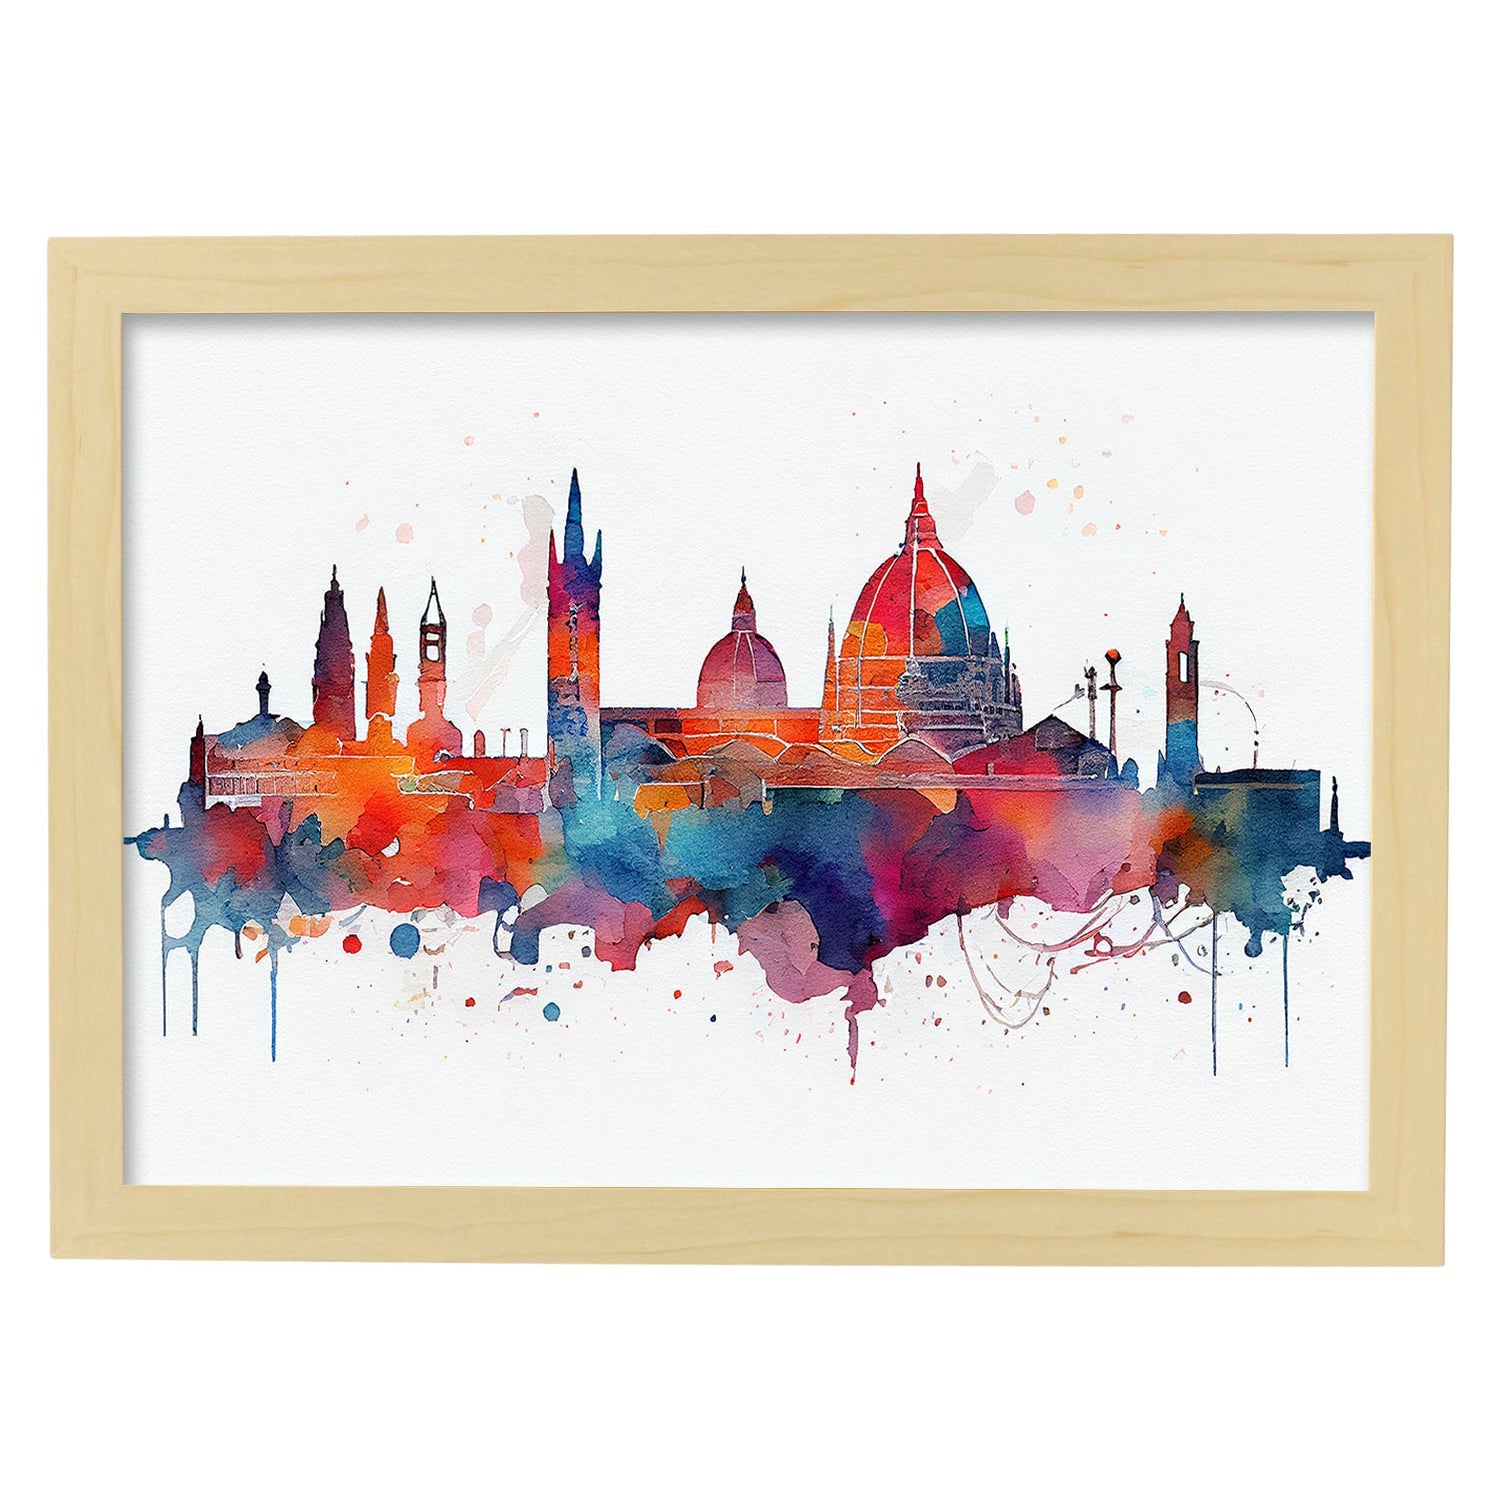 Nacnic watercolor of a skyline of the city of Florence_2. Aesthetic Wall Art Prints for Bedroom or Living Room Design.-Artwork-Nacnic-A4-Marco Madera Clara-Nacnic Estudio SL